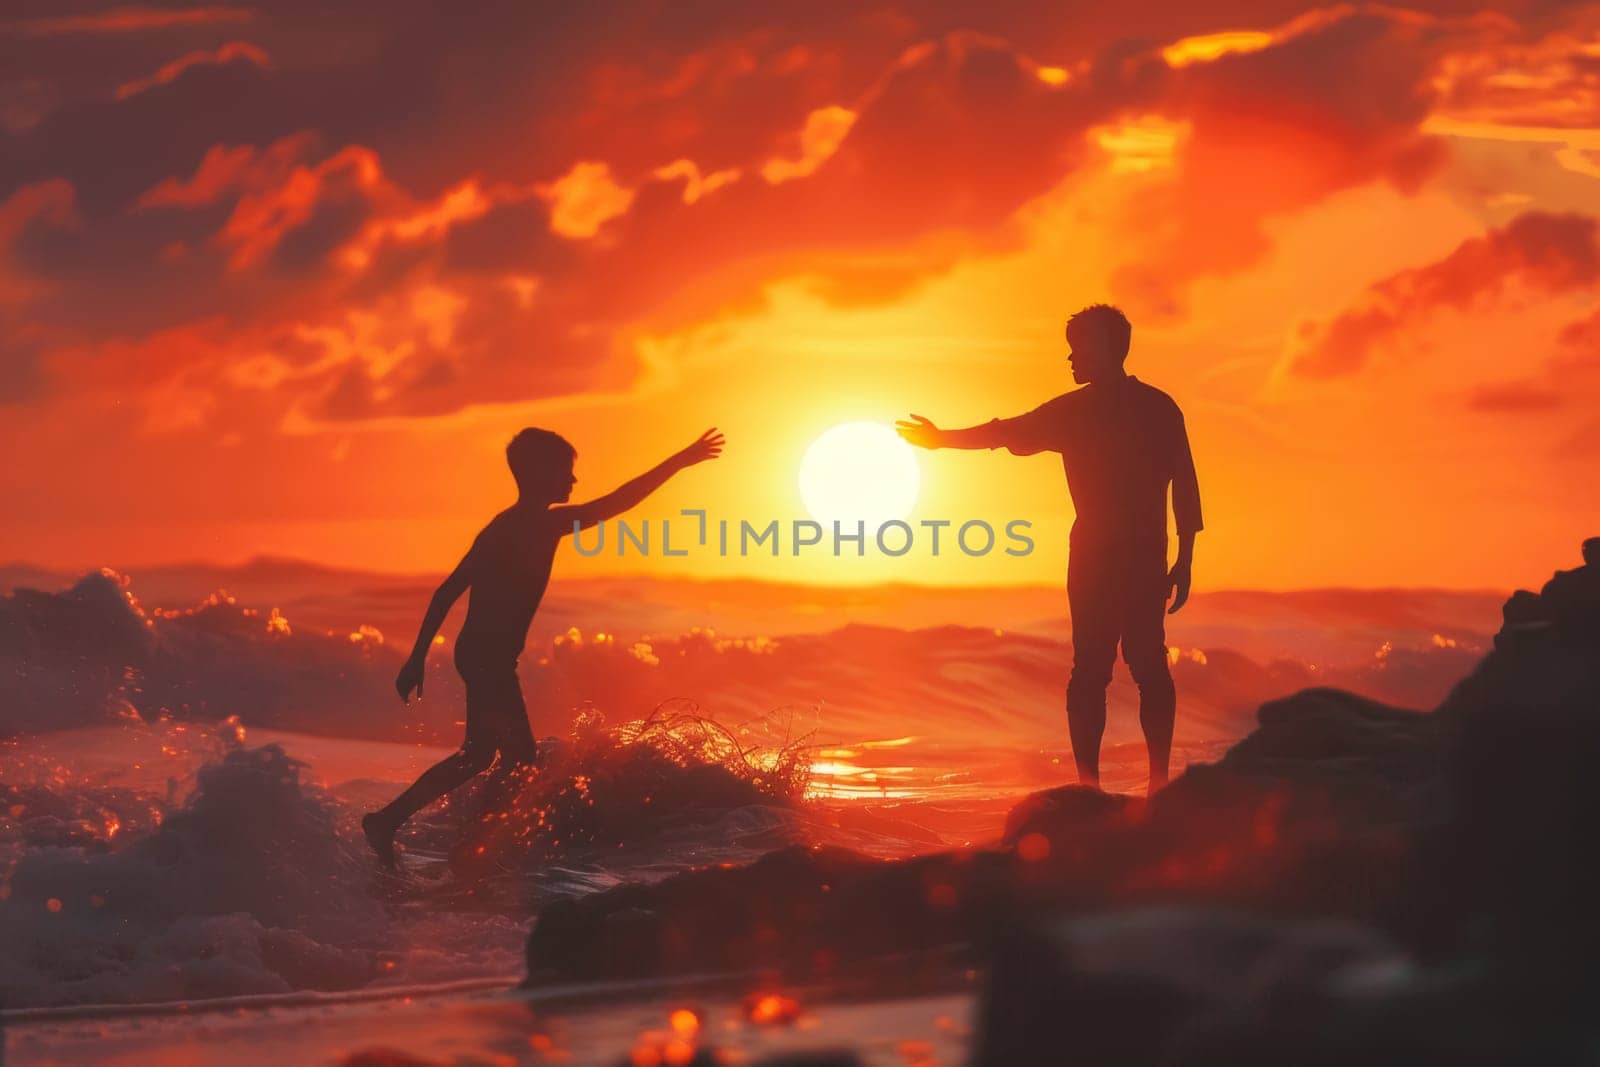 Two silhouettes against a vibrant sunset over the ocean, one person reaching out to the other amidst dynamic waves